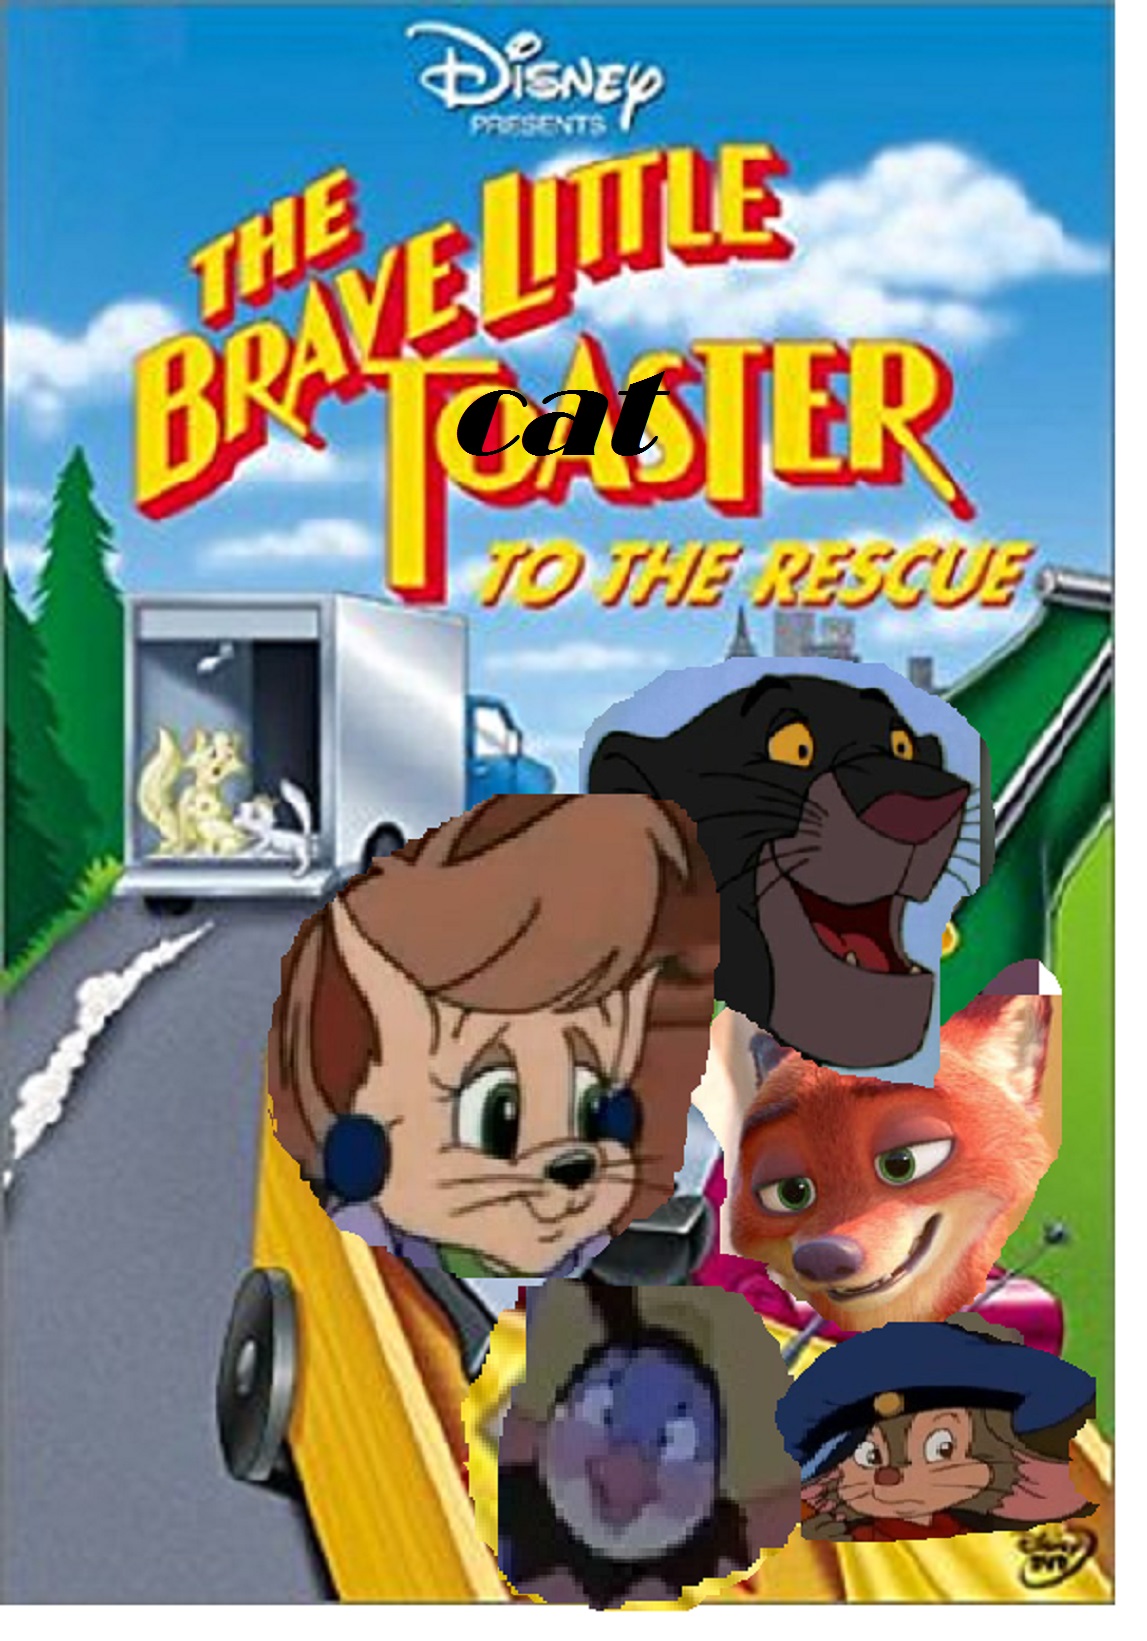 the brave little toaster to the rescue poster